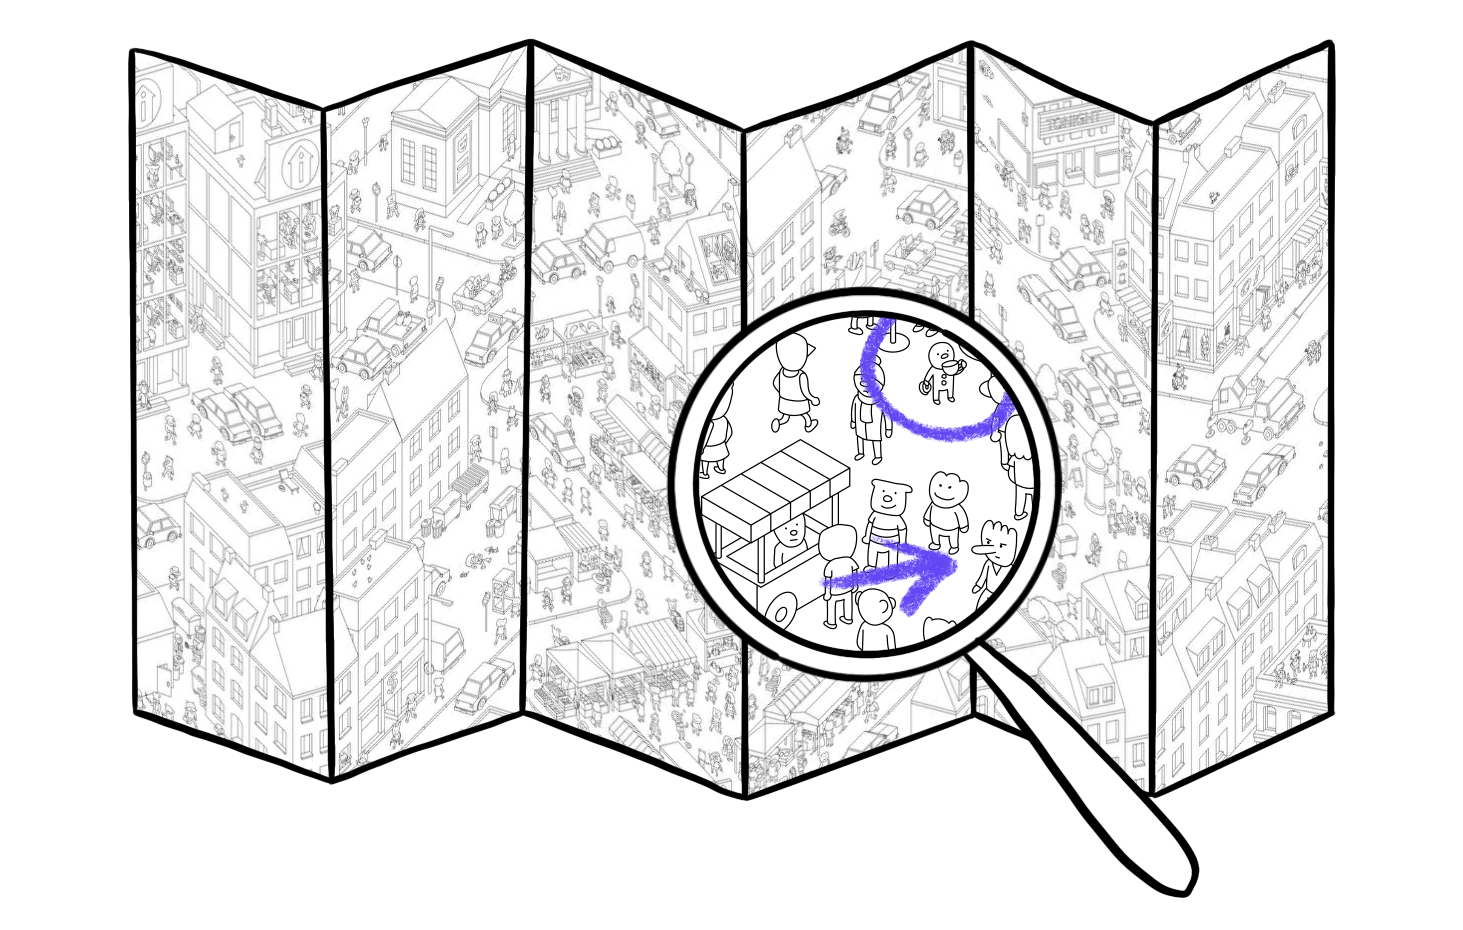 A map of a city, in black and white, in a doodle style. A magnifying glass on top of the maps shows a portion of the map. A toddler is circled. An arrow points at a long-nosed character.